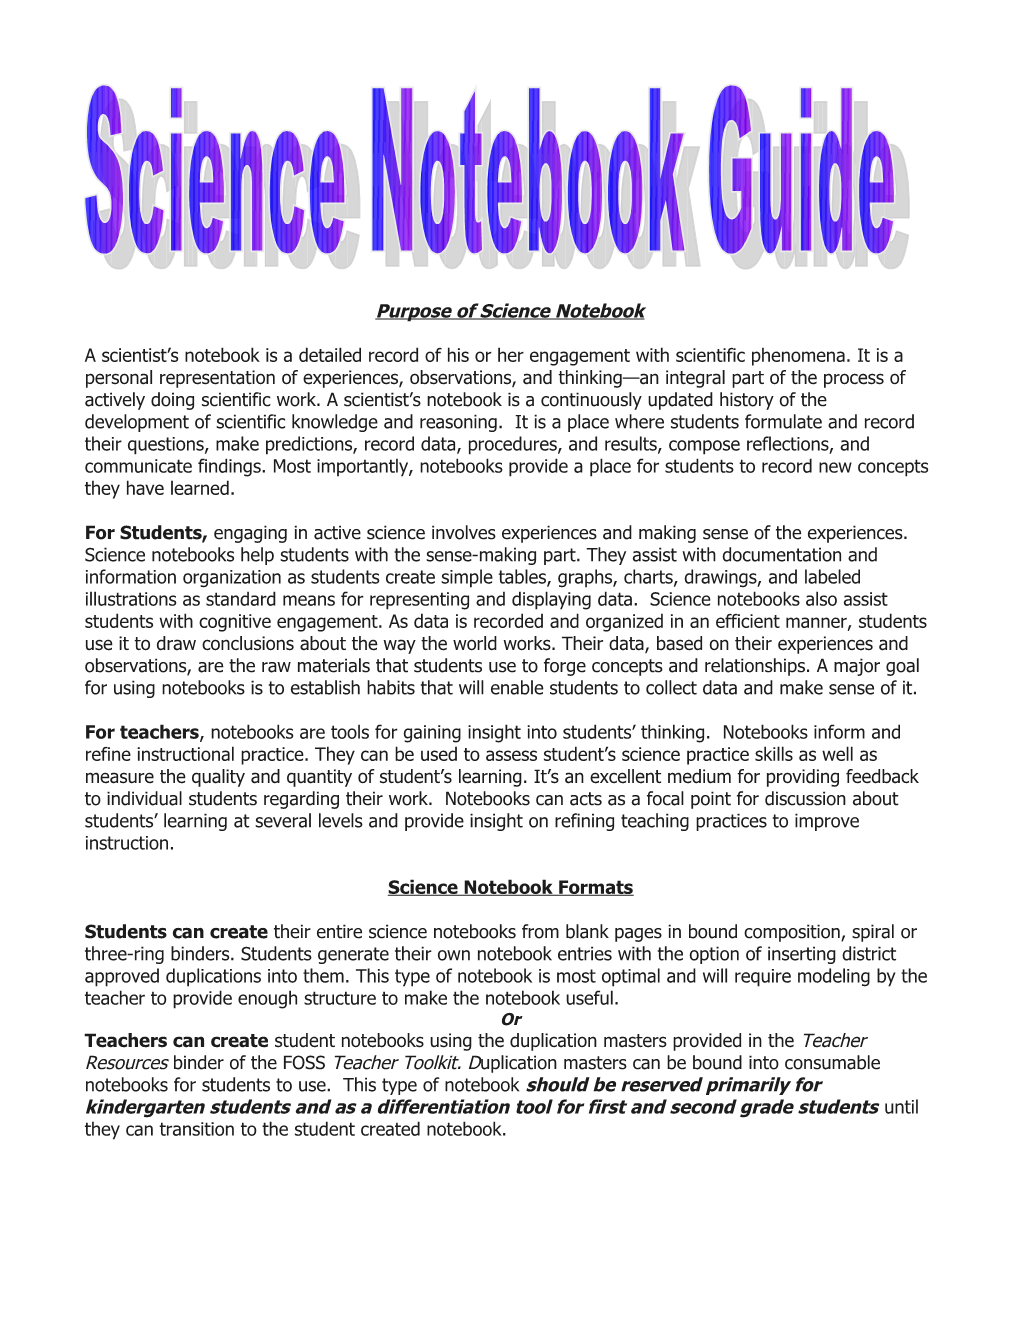 Purpose of Science Notebook